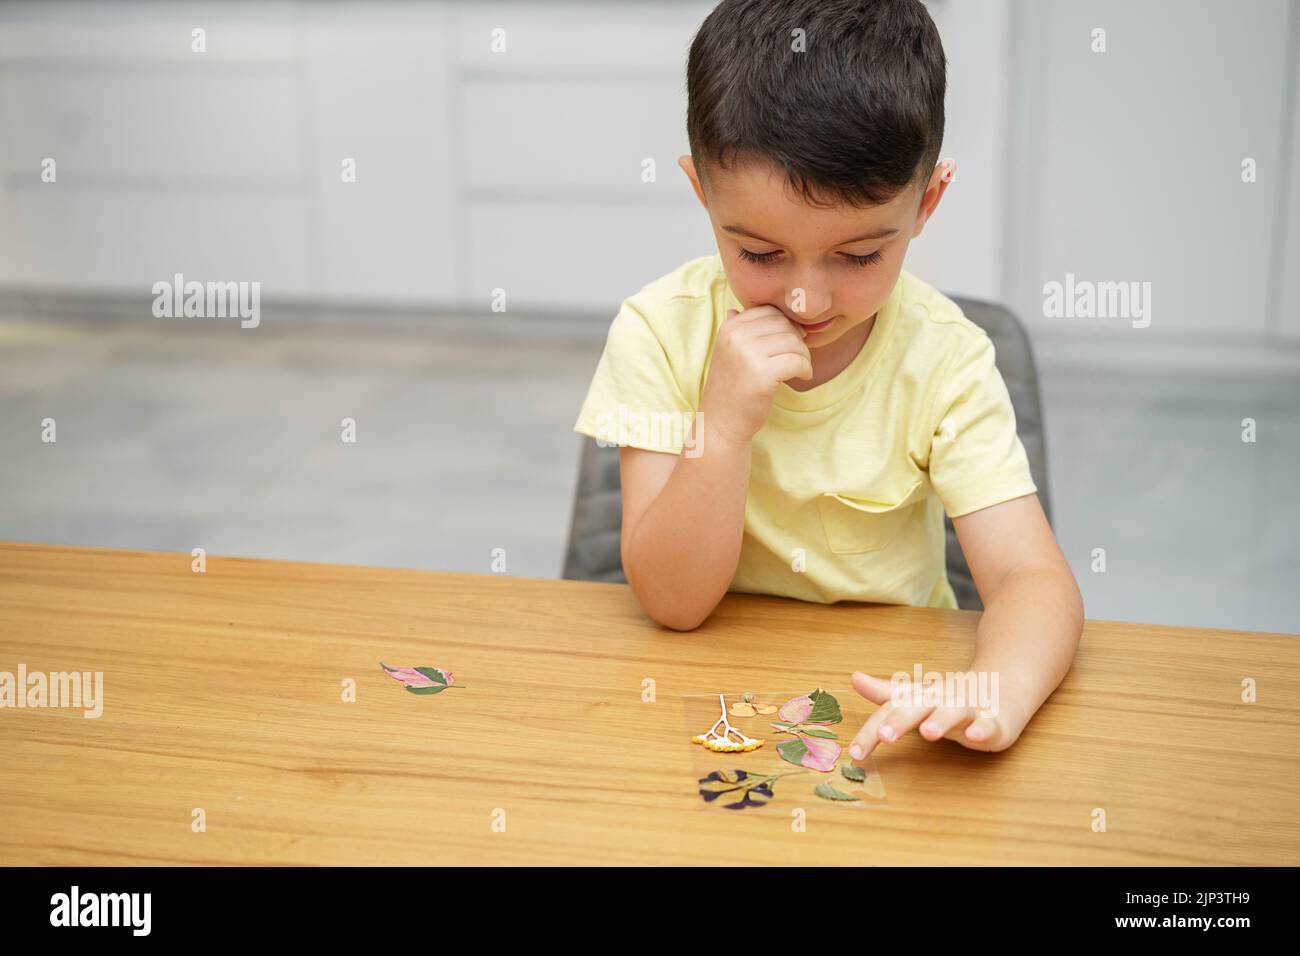 Child with glass picture frame, pressed leaves, and pressed flowers making herbarium on dining wood table in home. Stock Photo